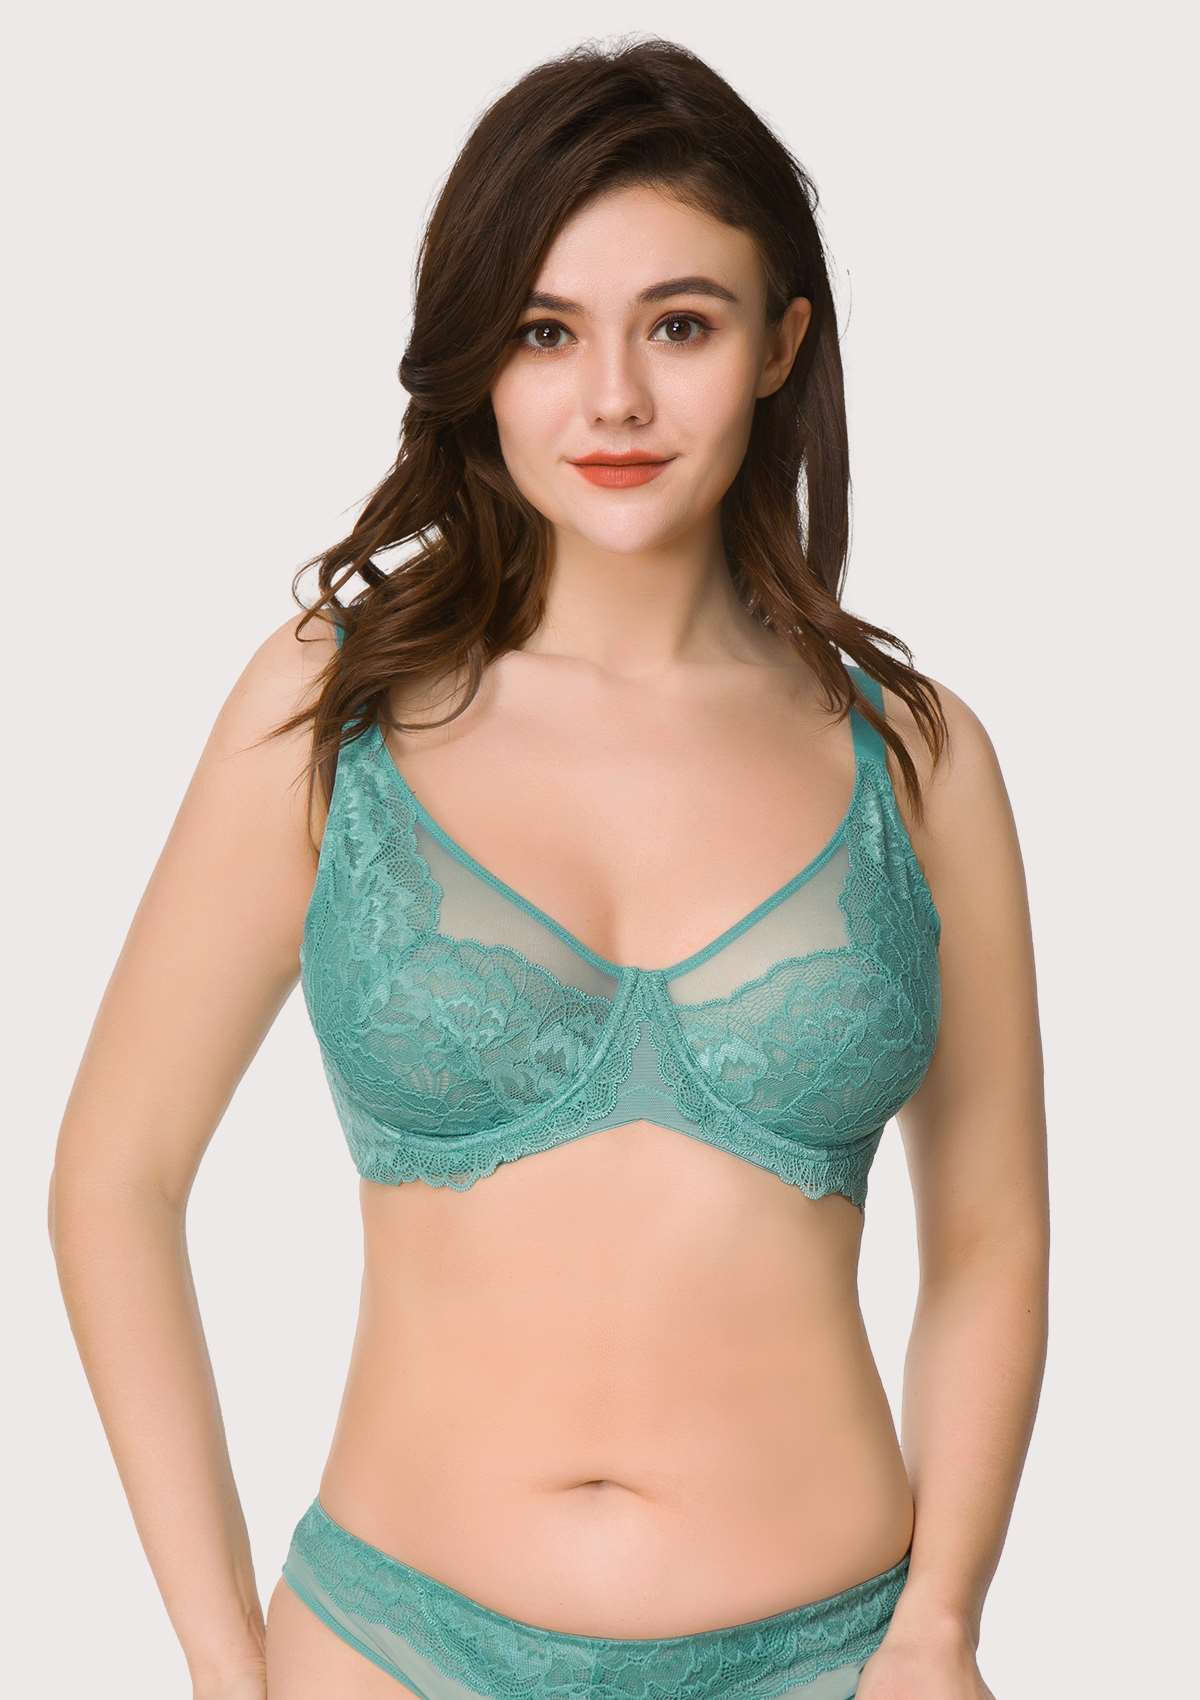 HSIA Peony Lace Unlined Supportive Underwire Bra - Dark Blue / 34 / D